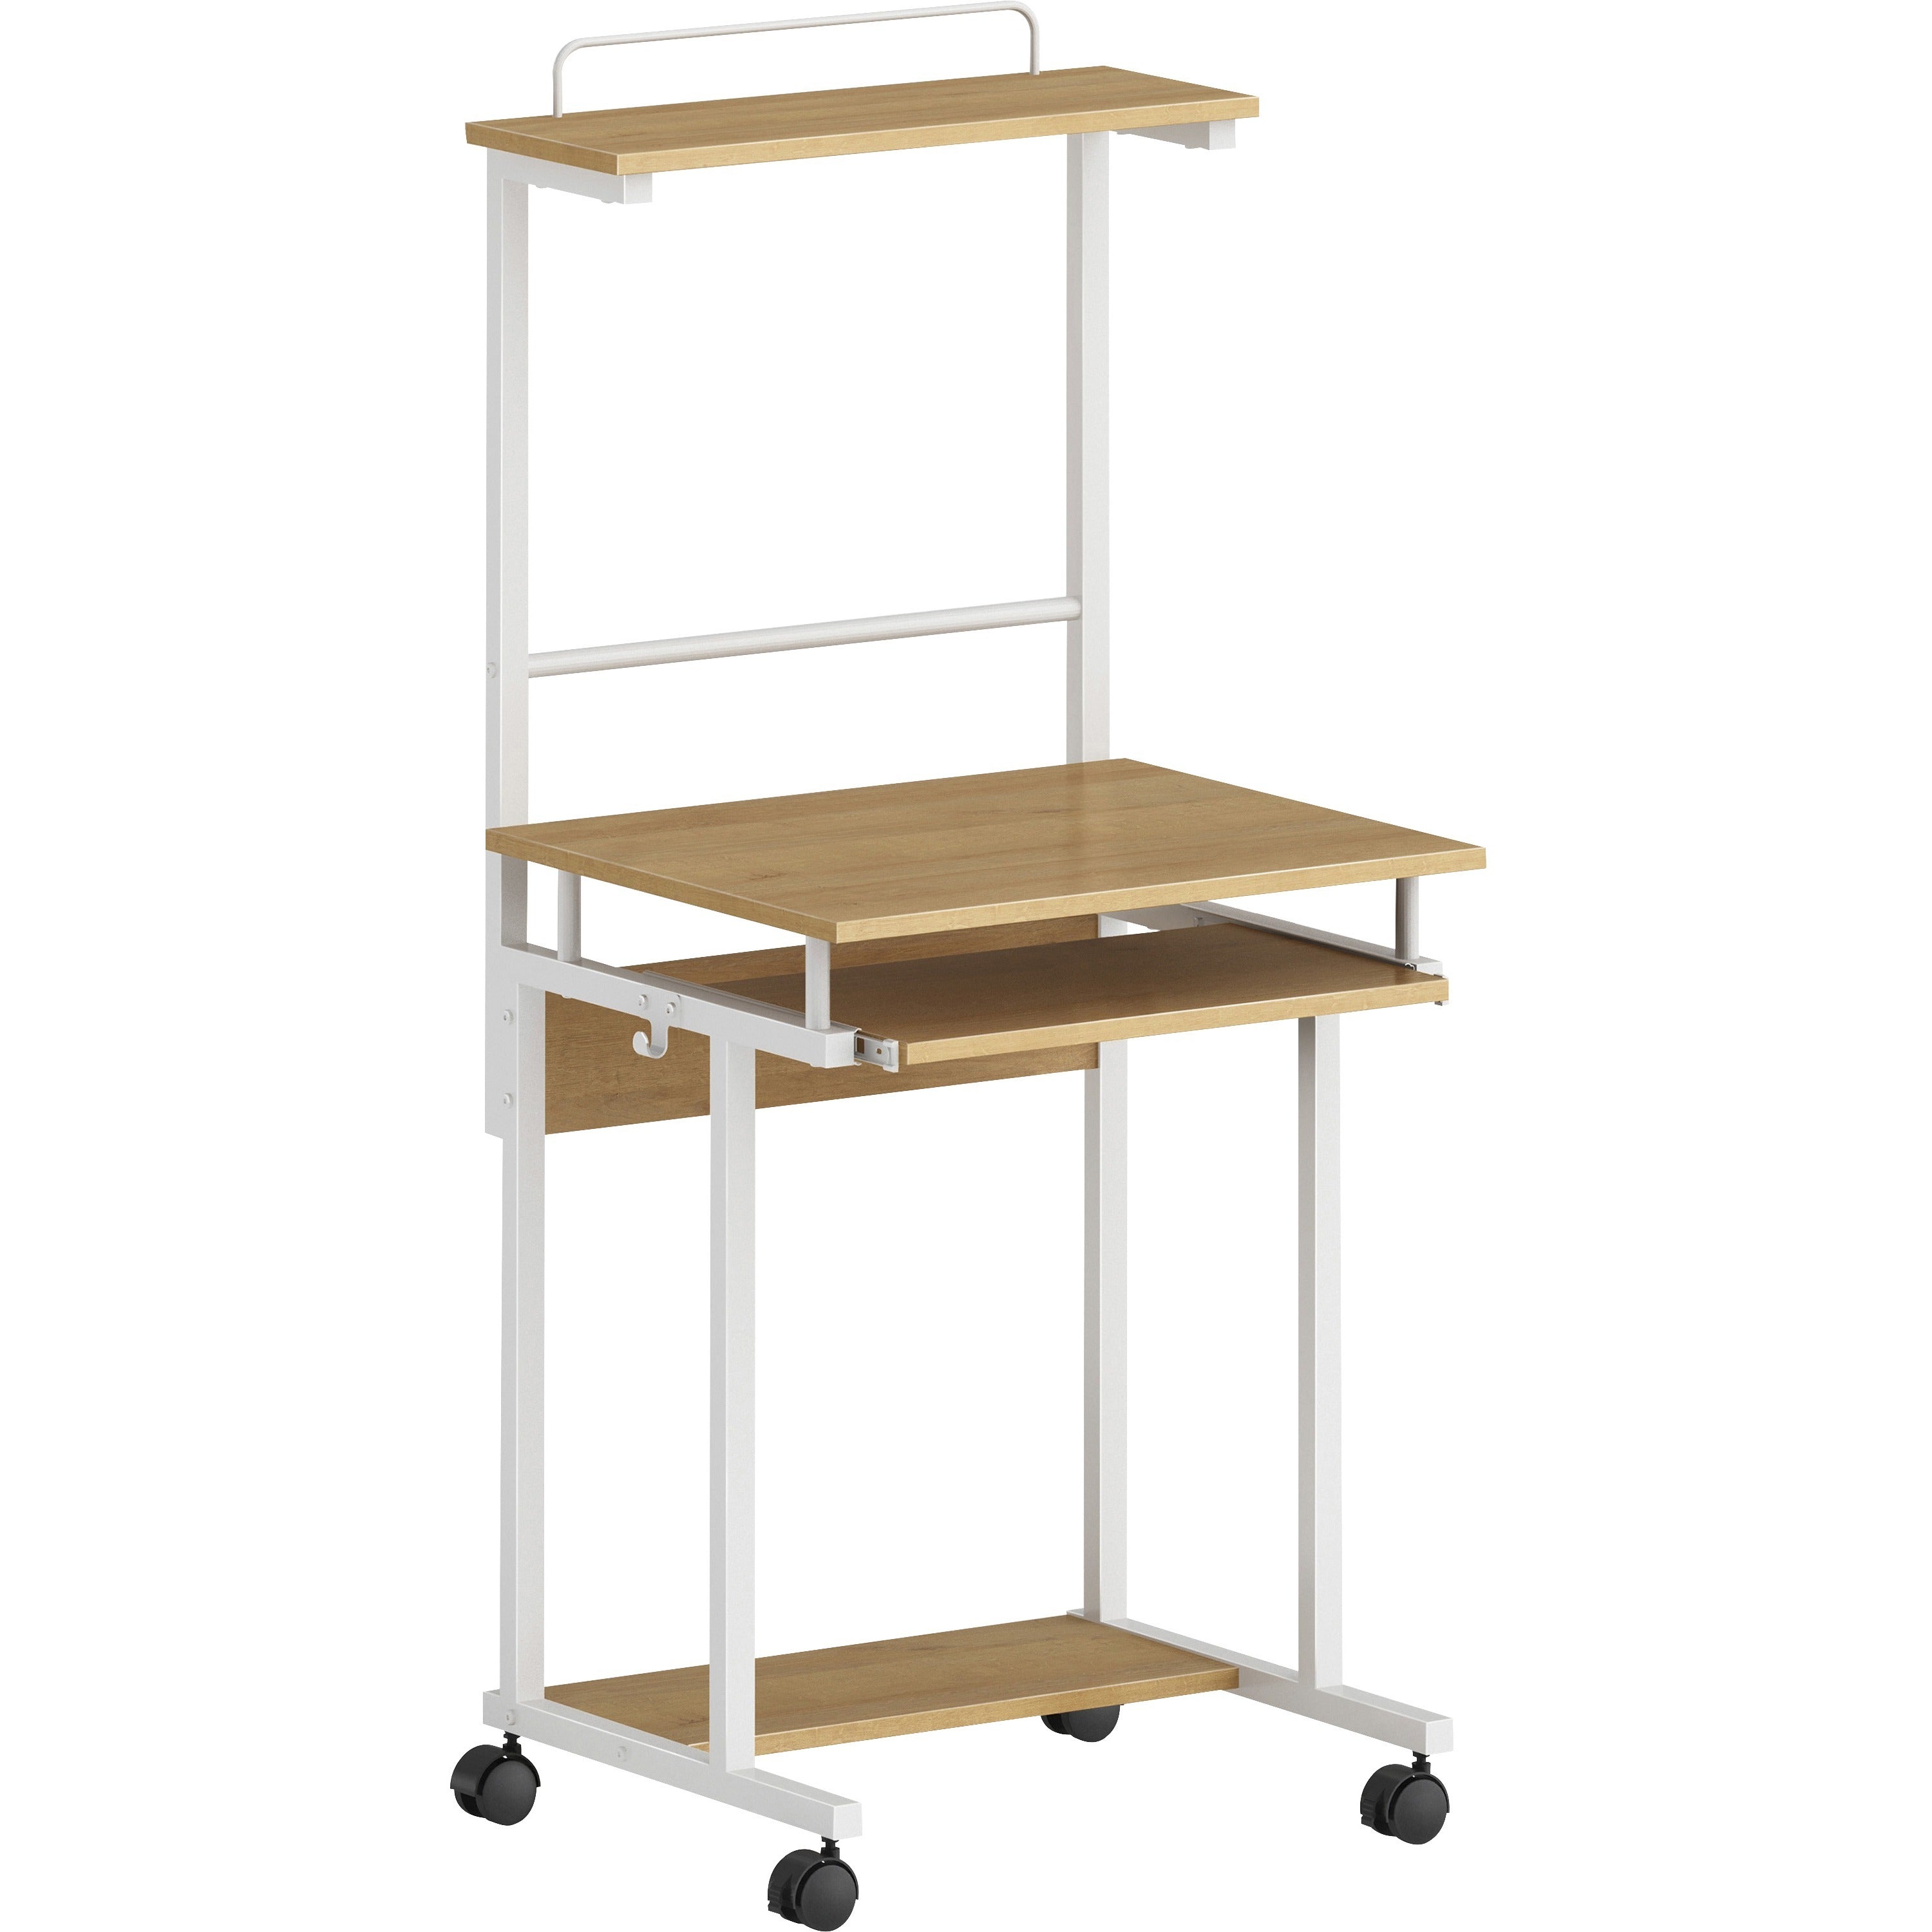 NuSparc Mobile Computer Workstation w/Keybrd Tray - For - Table TopMaple, White Top - 110 lb Capacity x 23.60" Table Top Width x 20.60" Table Top Depth - 53.50" Height - Assembly Required - Medium Density Fiberboard (MDF) Top Material - 1 Each - 1